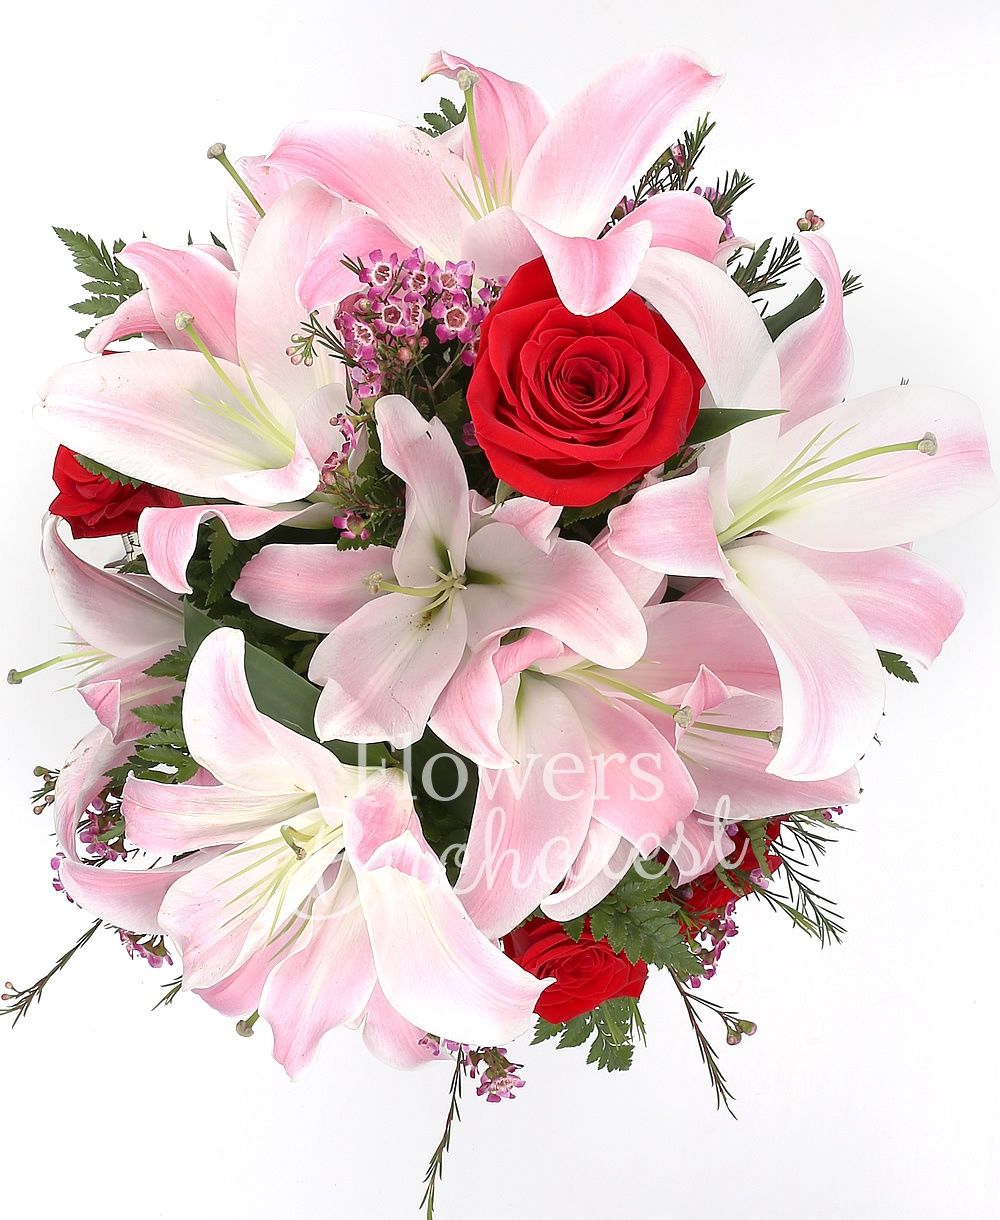 3 pink lilies, 5 red roses, greenery